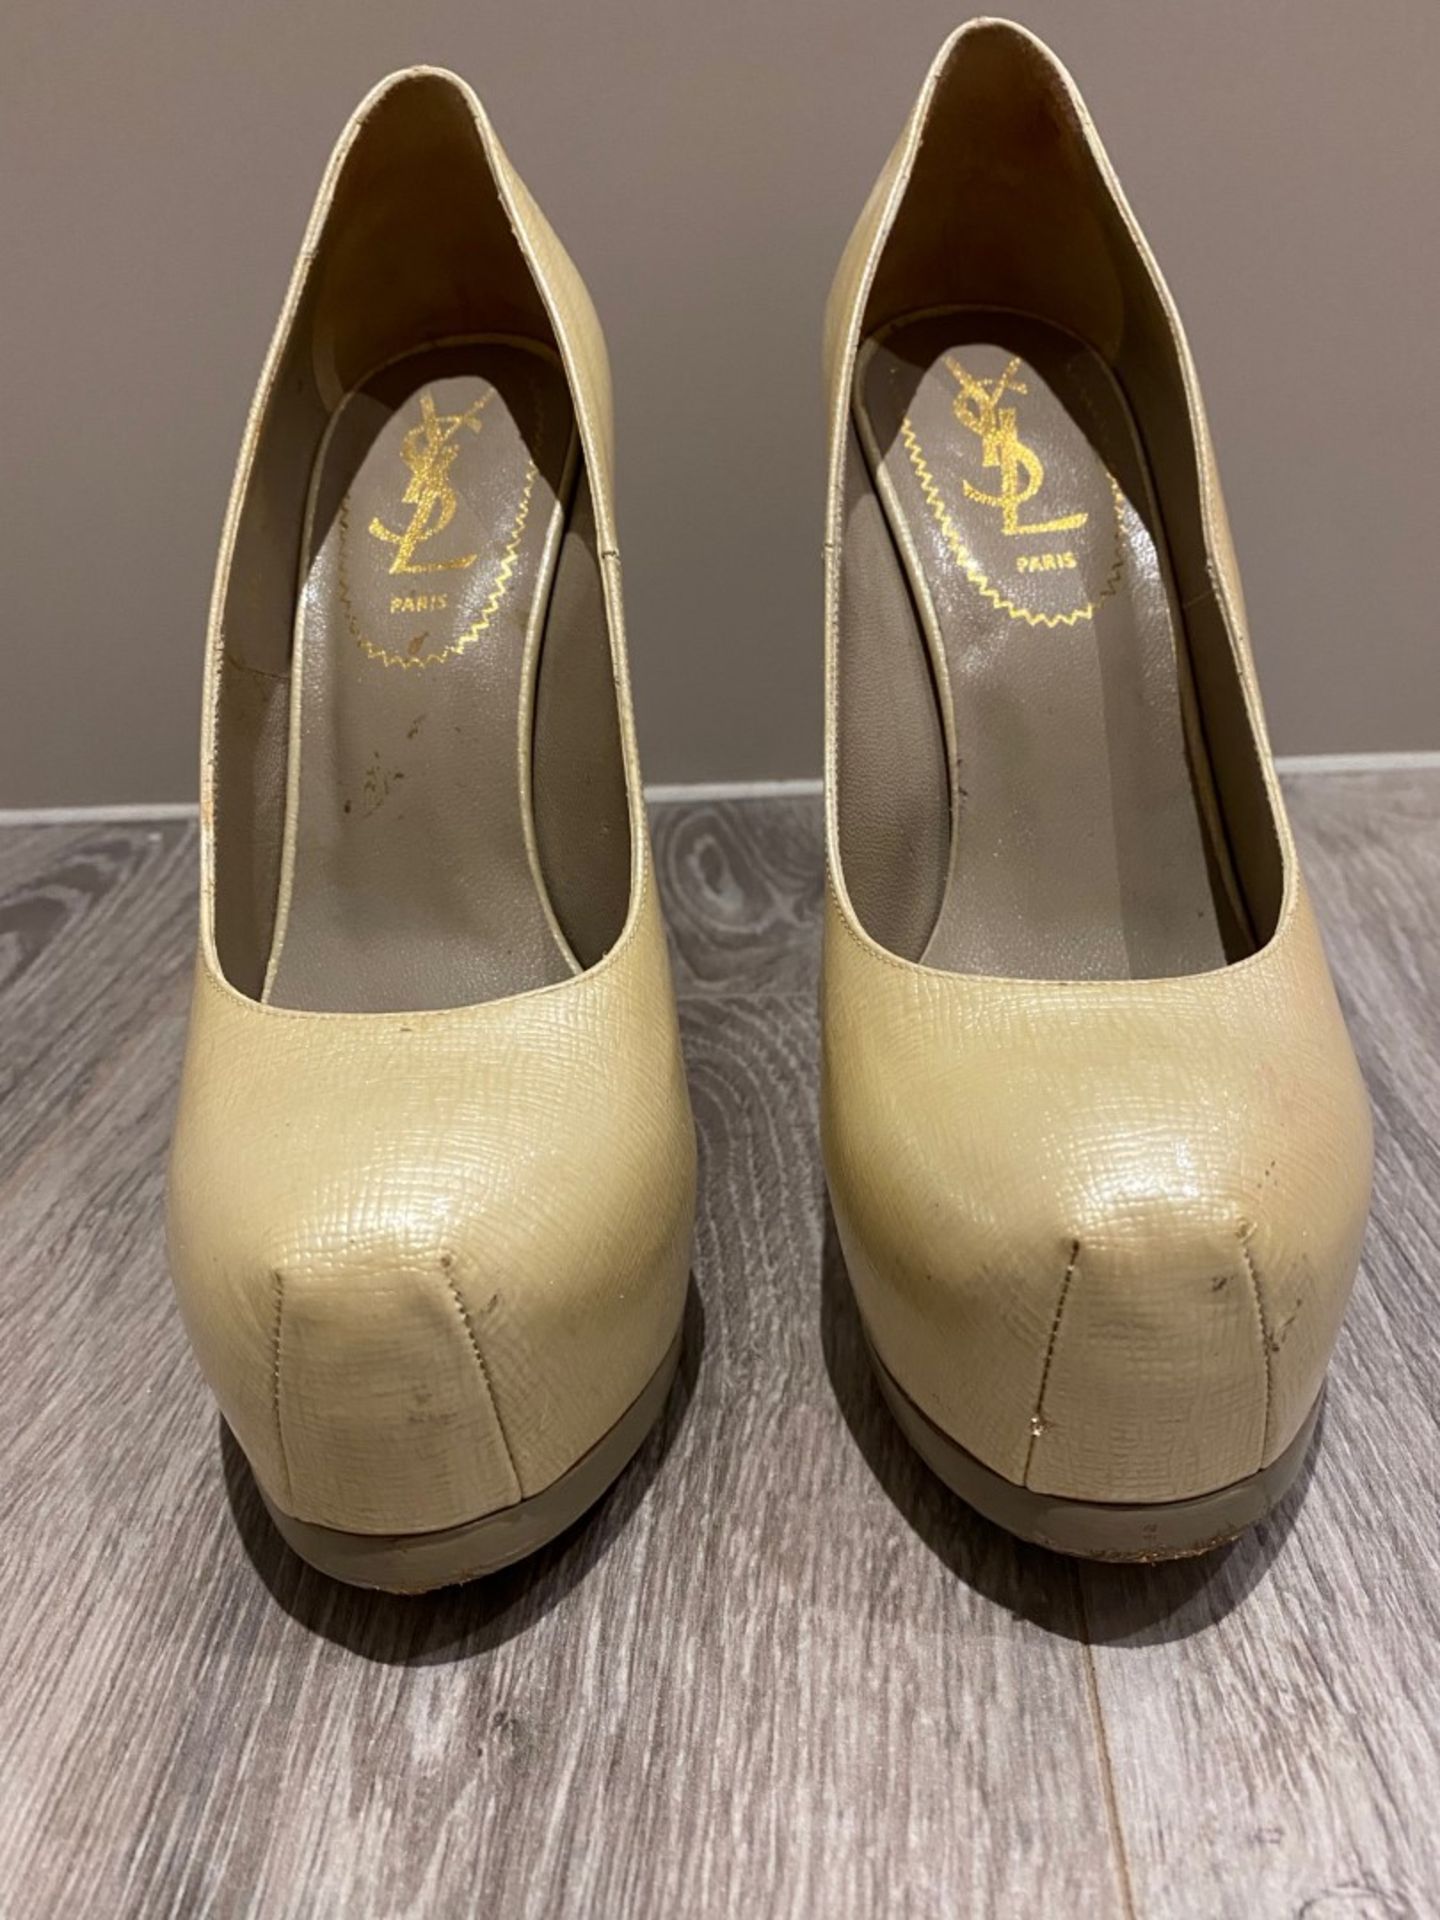 1 x Pair Of Genuine YSL High Heel Shoes In Champagne - Size: 36 - Preowned in Worn Condition - Ref: - Image 5 of 5